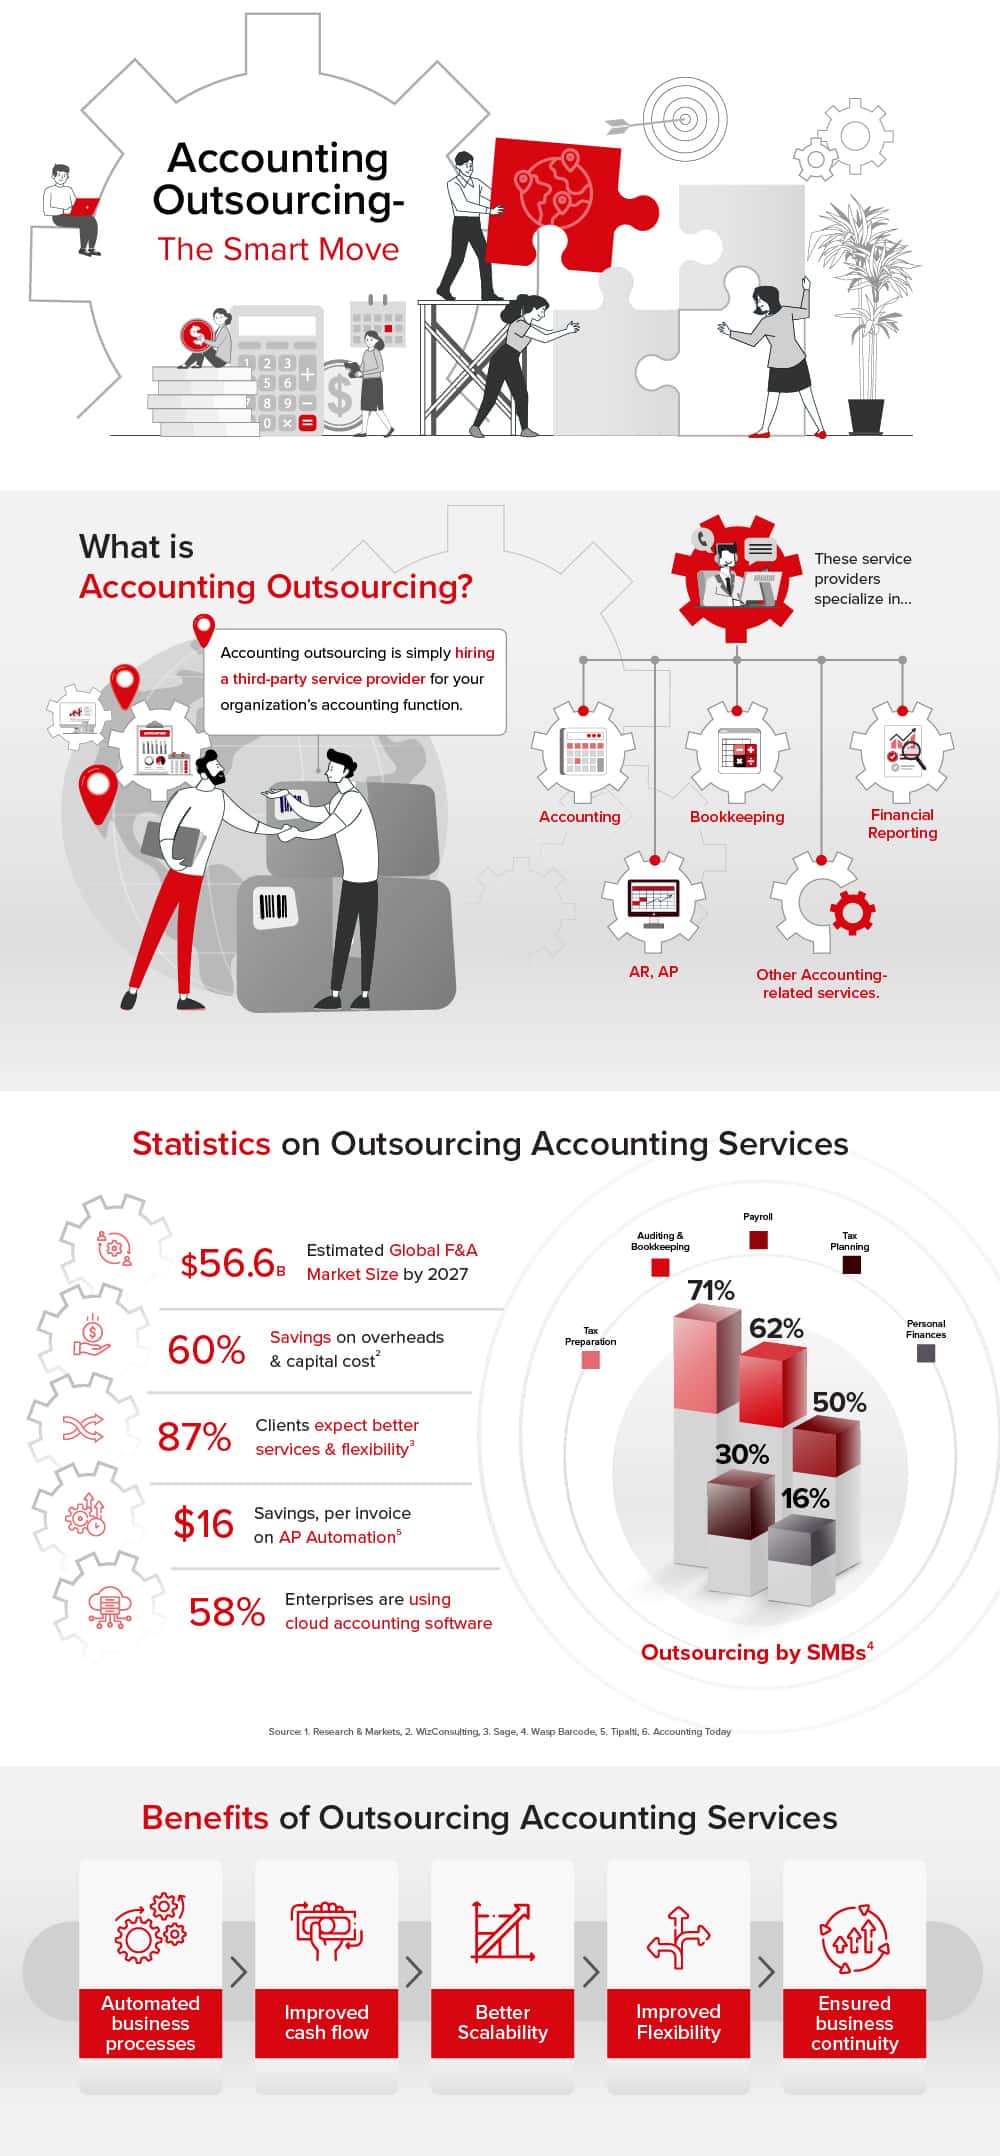 Why Outsourcing Accounting Services is a Smart Move